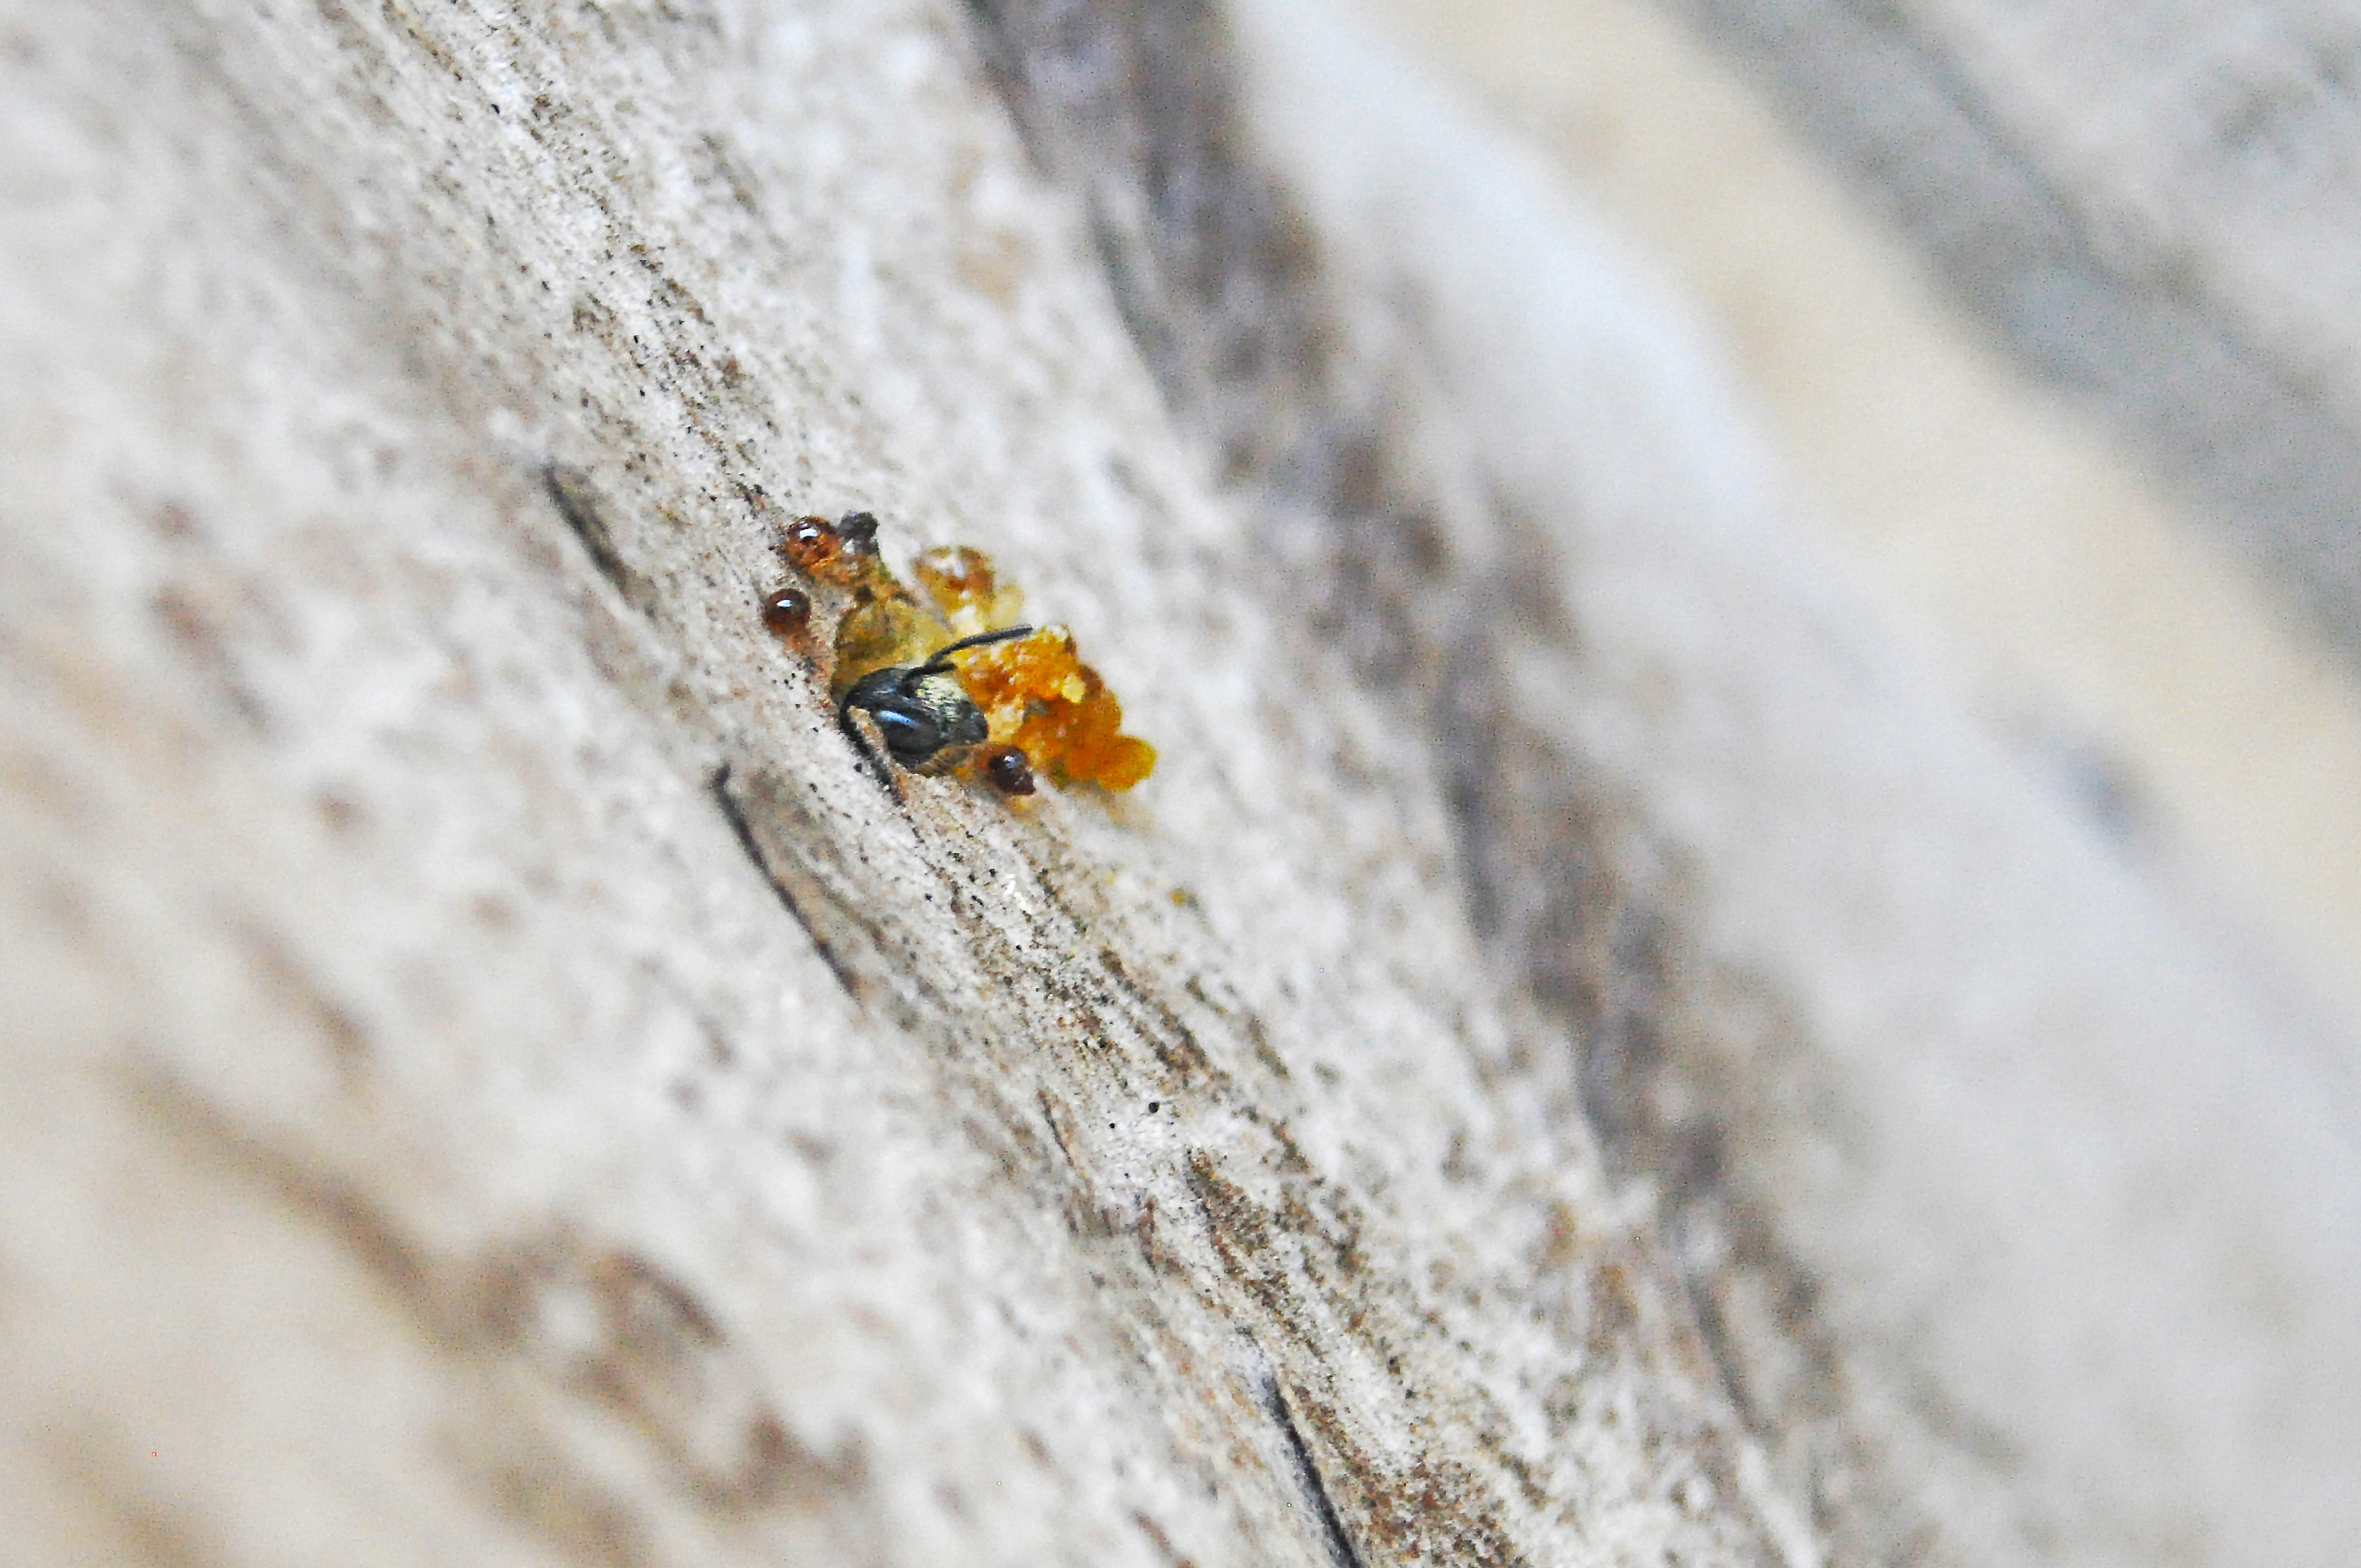 In a pale, slightly textured wall is a hole surrounded by amber-like resin. A small bee is poking its head out of the hole.